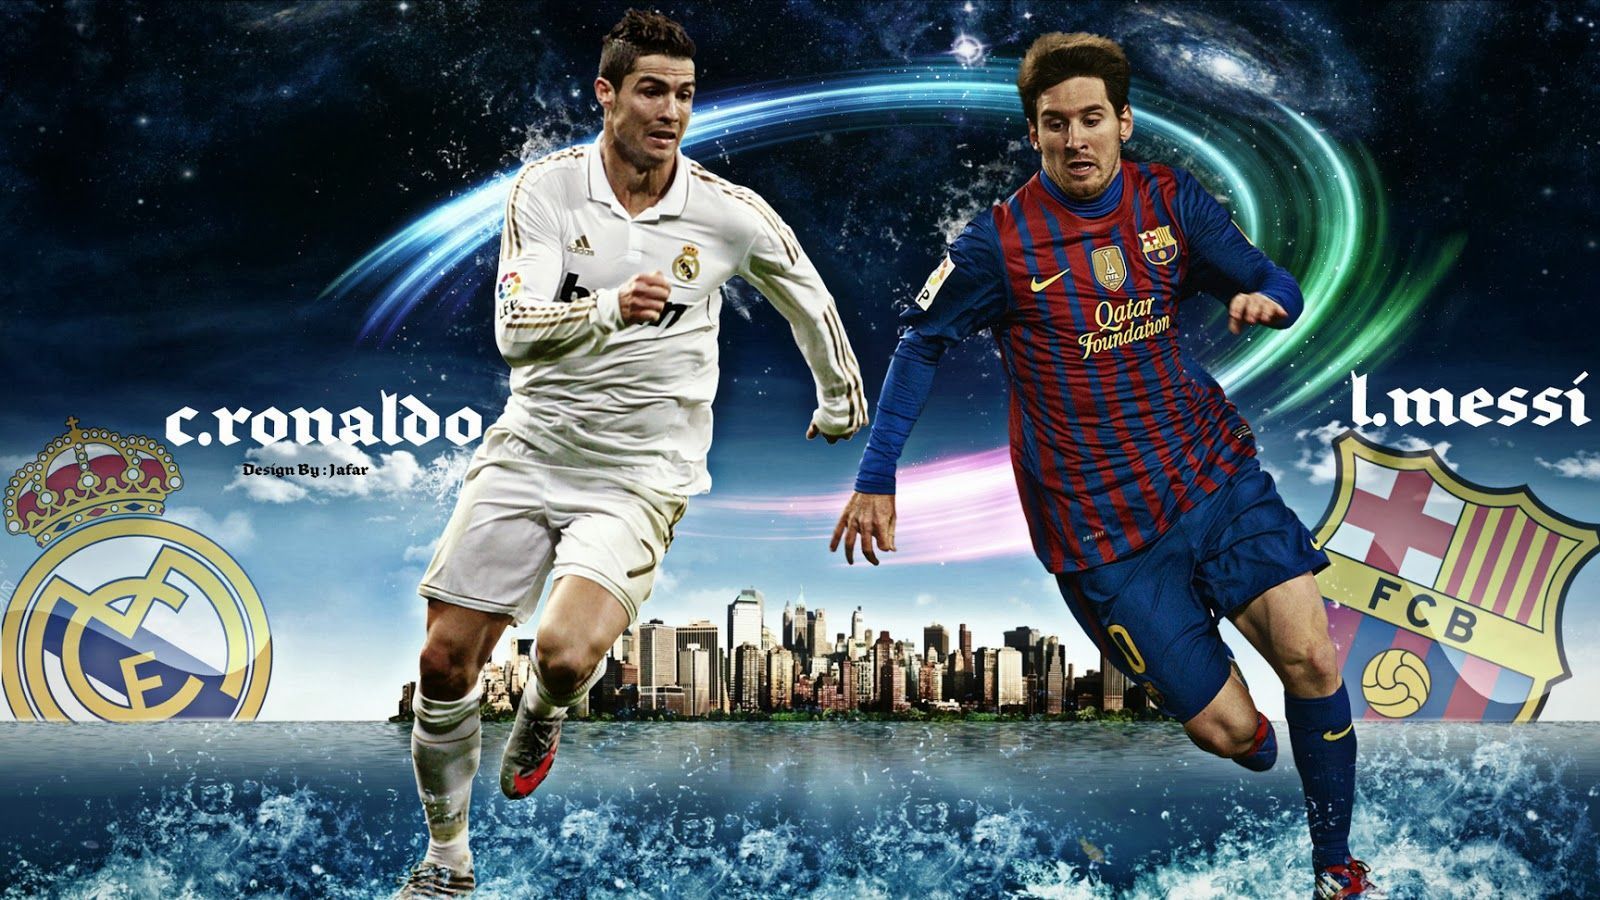 Ronaldo Vs Messi Wallpaper For iPhone 06y Awesomeness